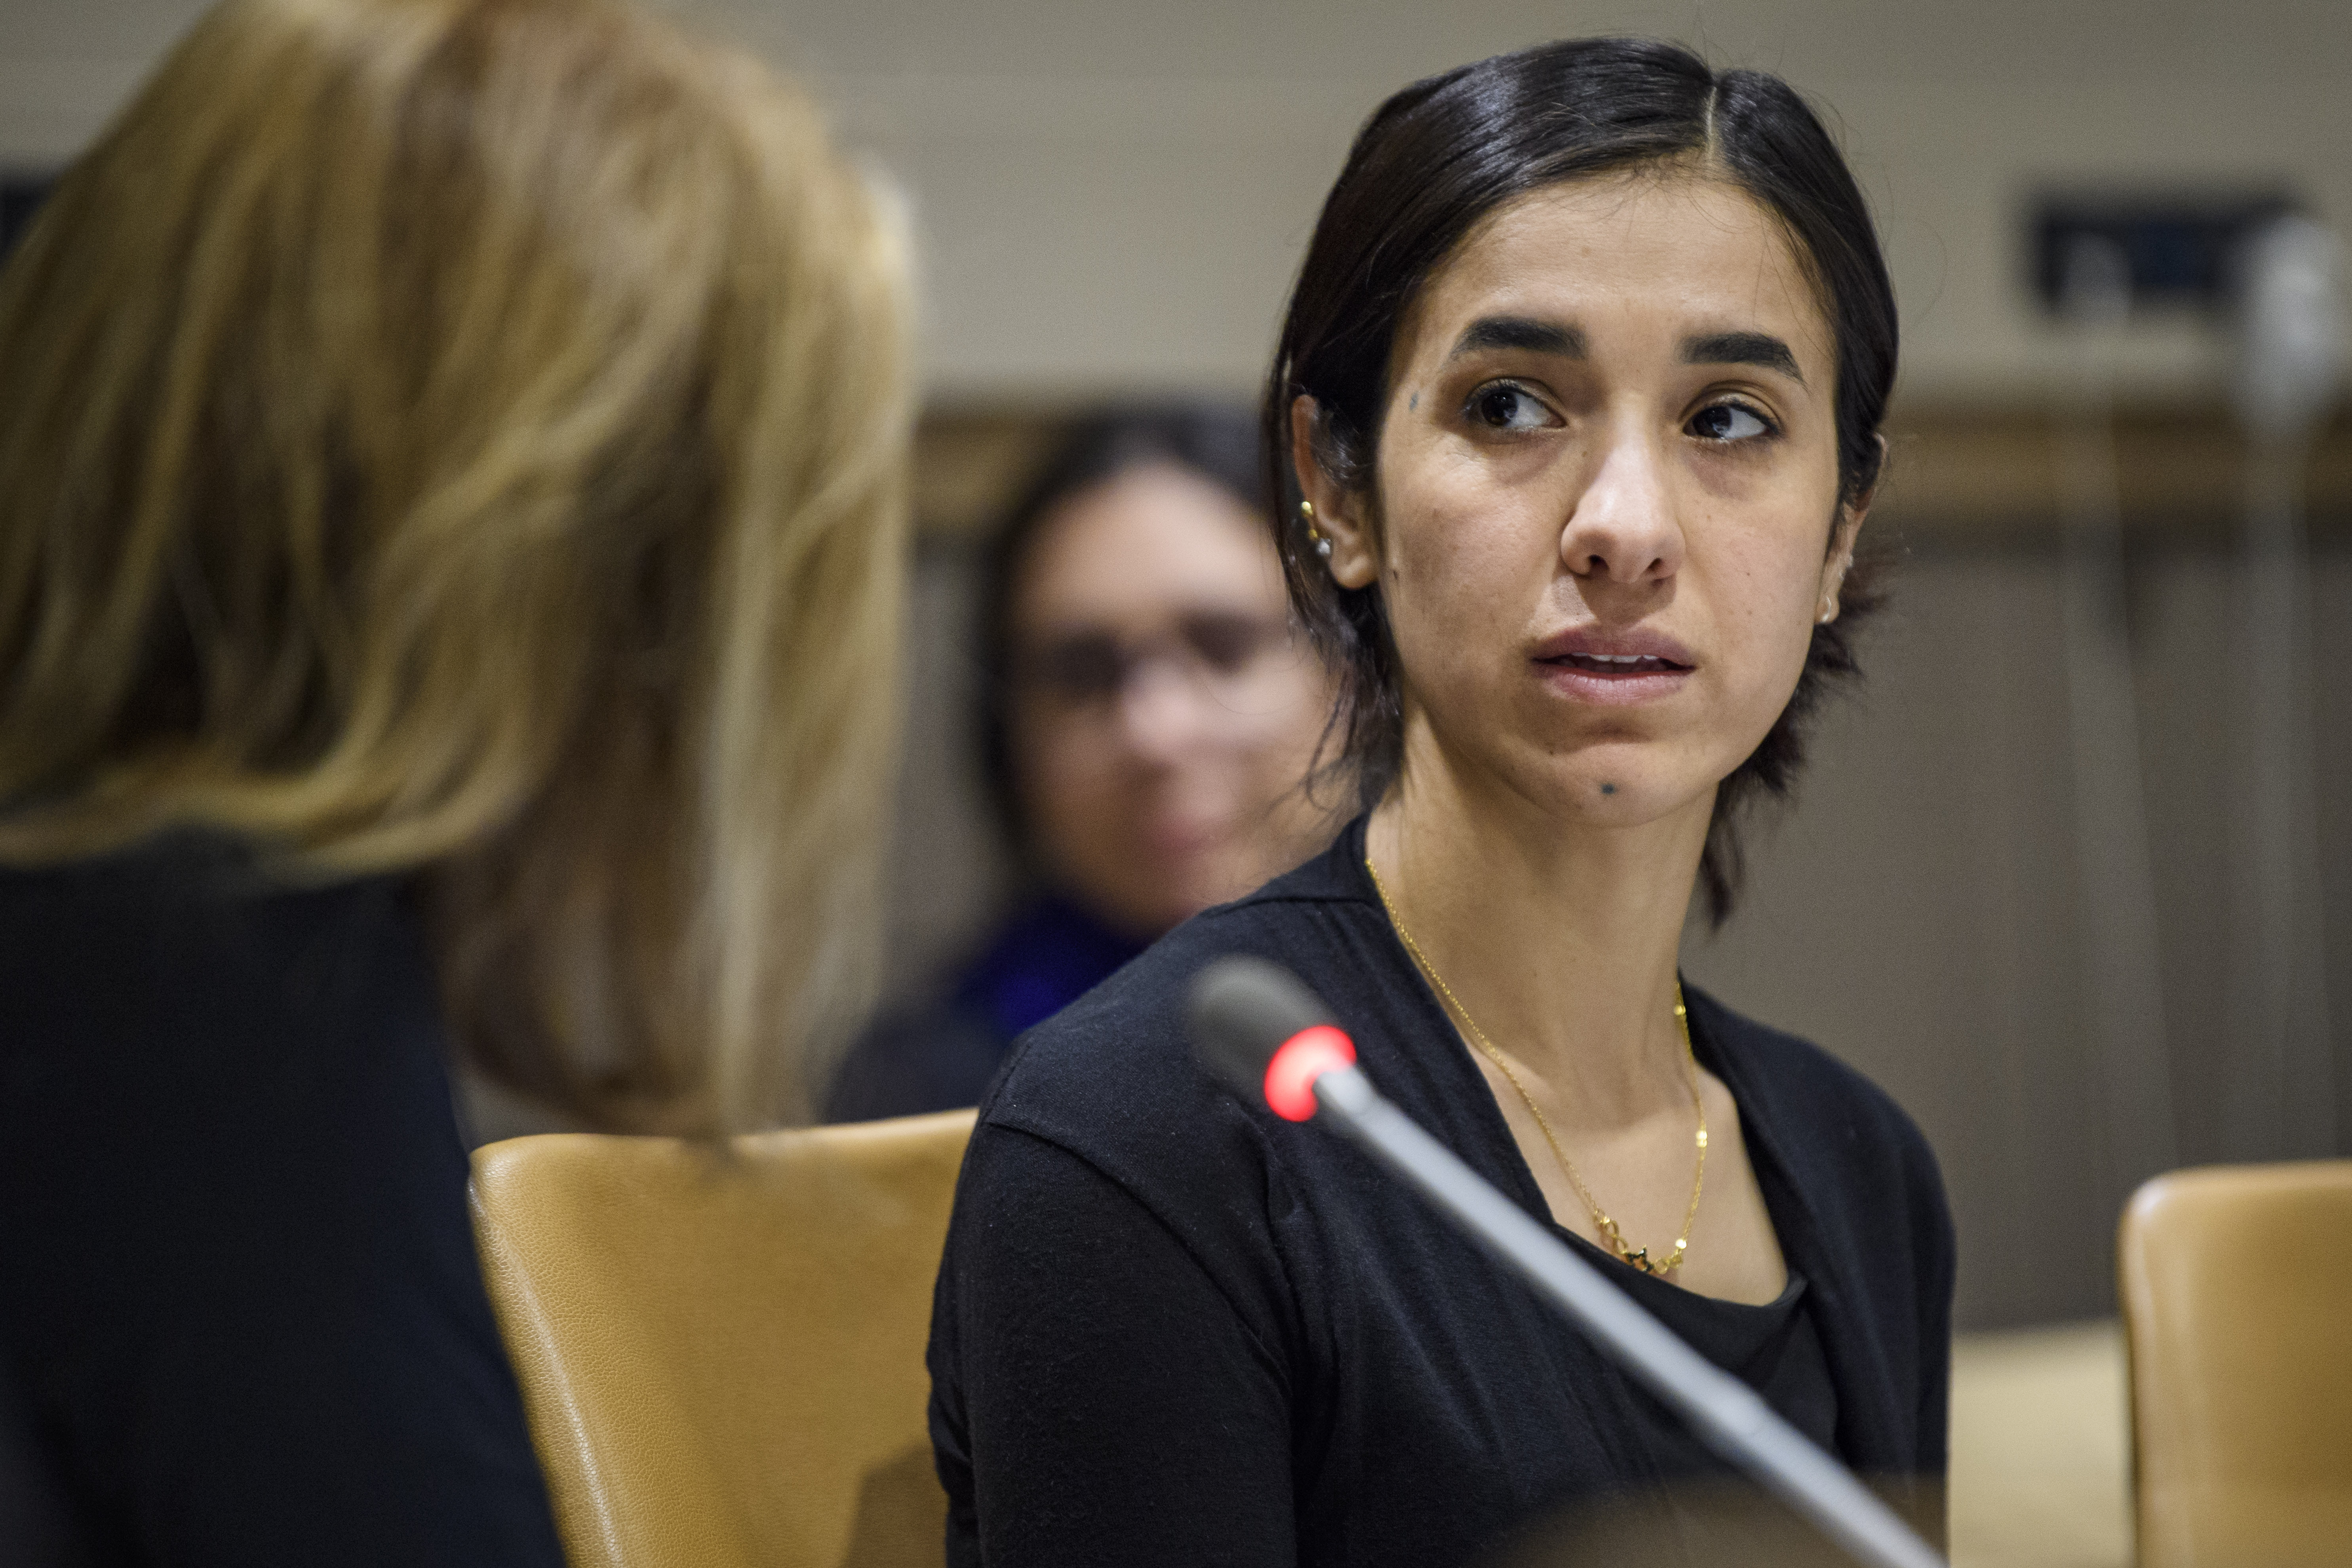 Nadia Murad details her fight against ISIL as part of a panel discussion on trafficking in persons organized by the United Nations Office on Drugs and Crime (UNODC). New York, 20 November 2017. UN Photo/Manuel Elias.  